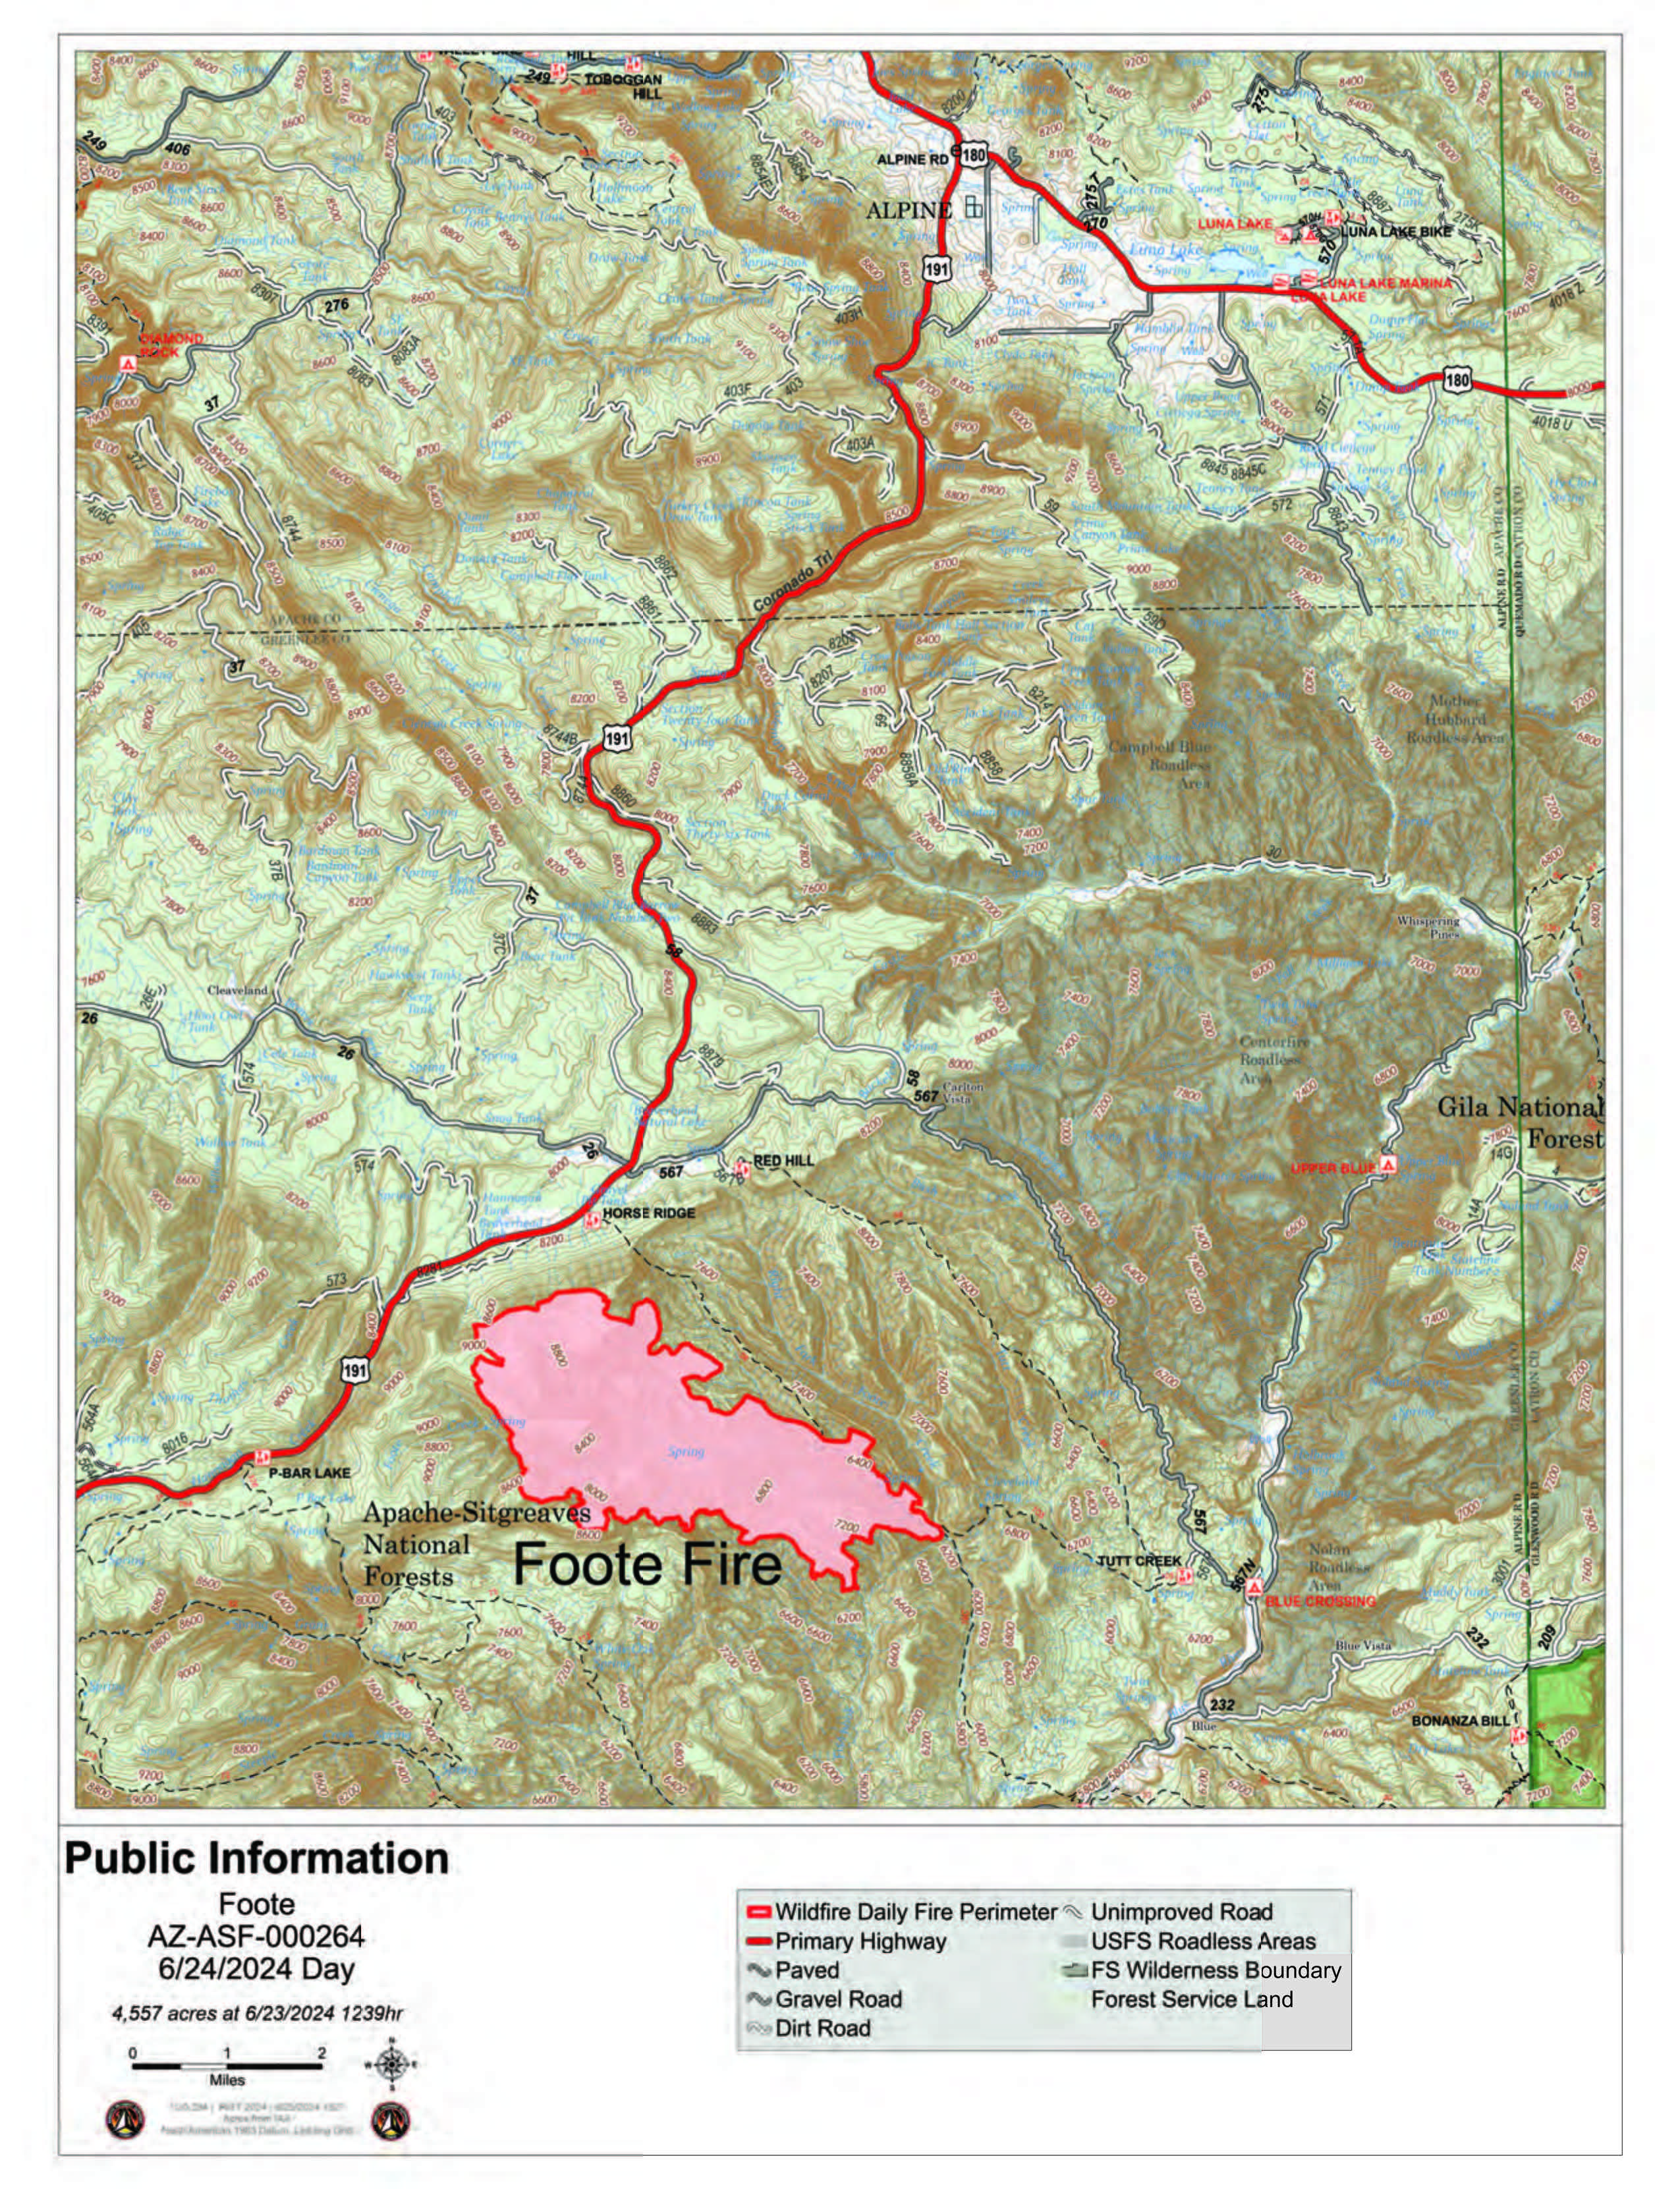 This is a map of the Foote Fire on June 24 2024